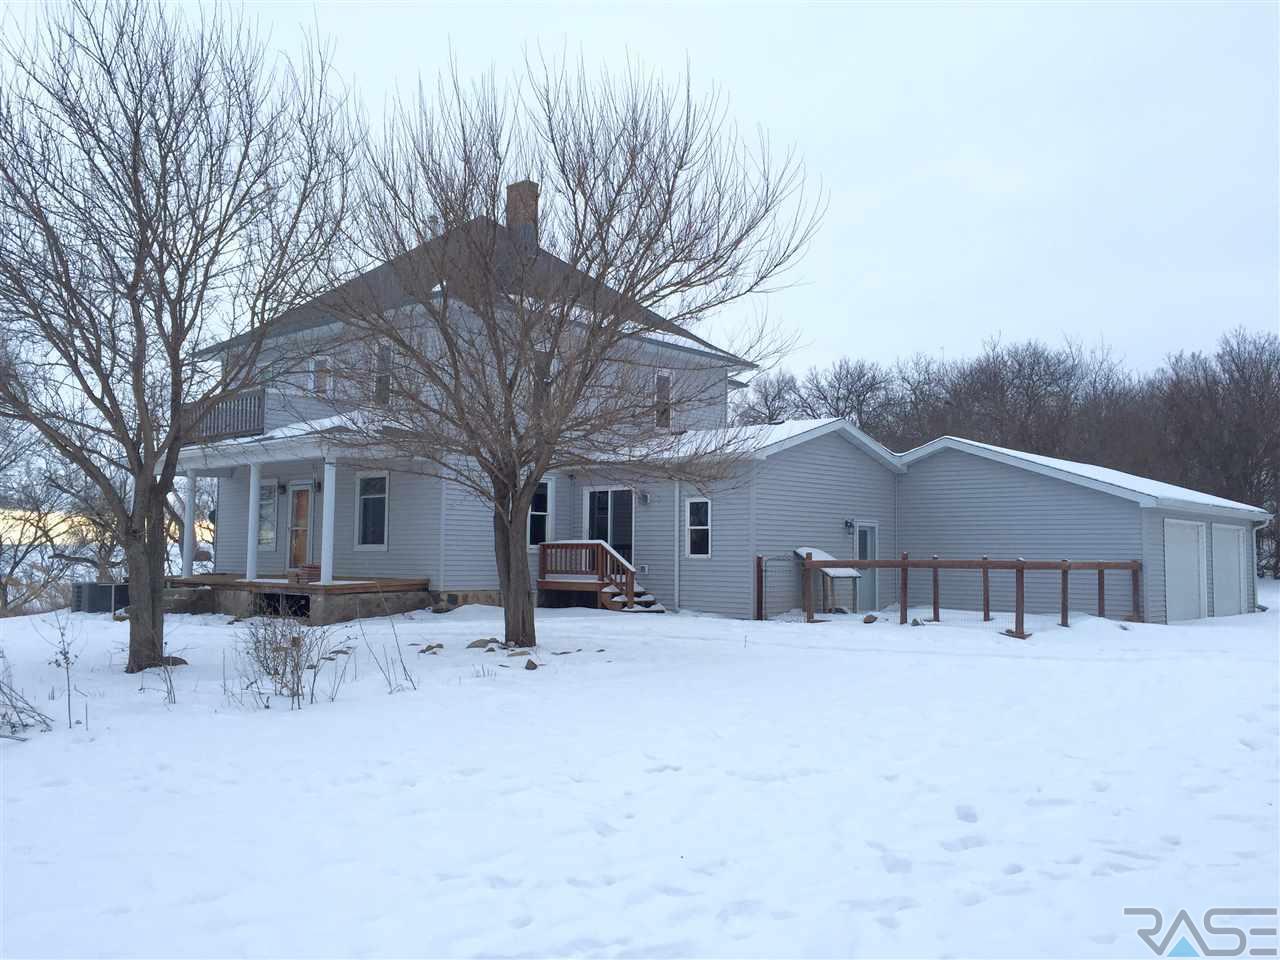 Another Property SOLD!  Chris Popkes, Broker / Owner EXIT Realty Sioux Empire, knows how to move those acreages!